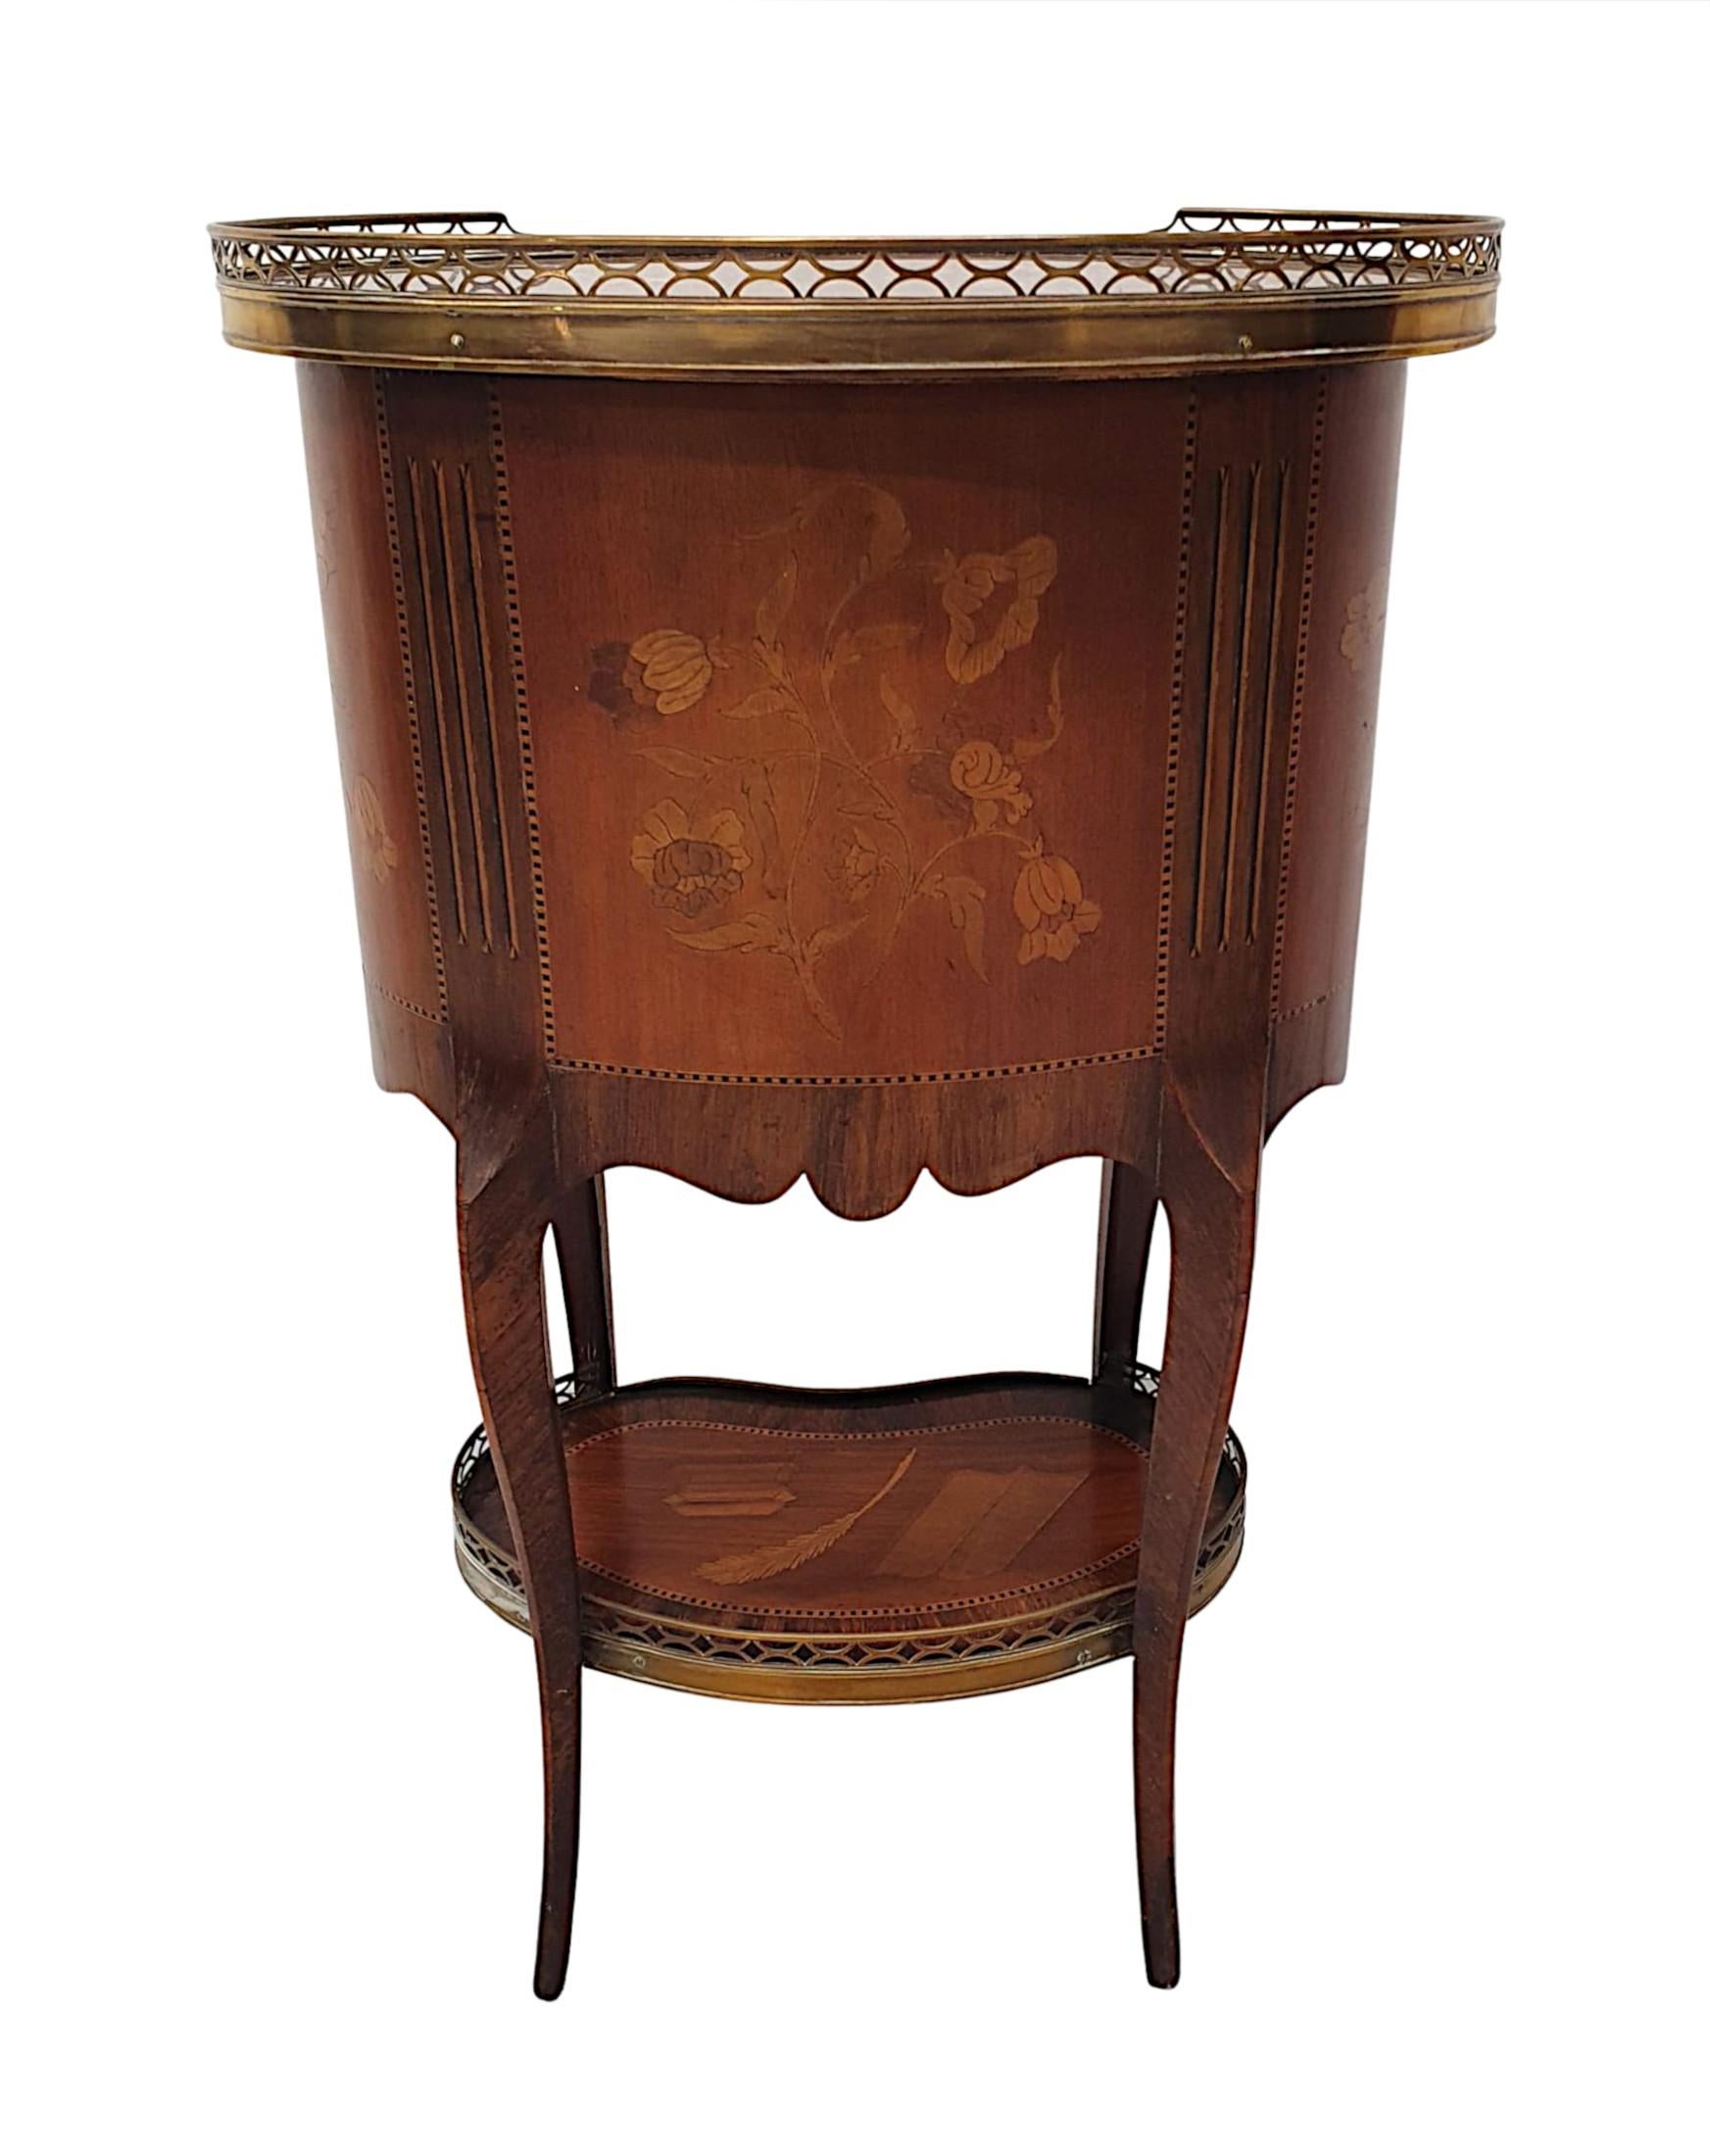 Fabulous 19th Century Inlaid Marble Top Cabinet with Ormolu Mounts For Sale 1